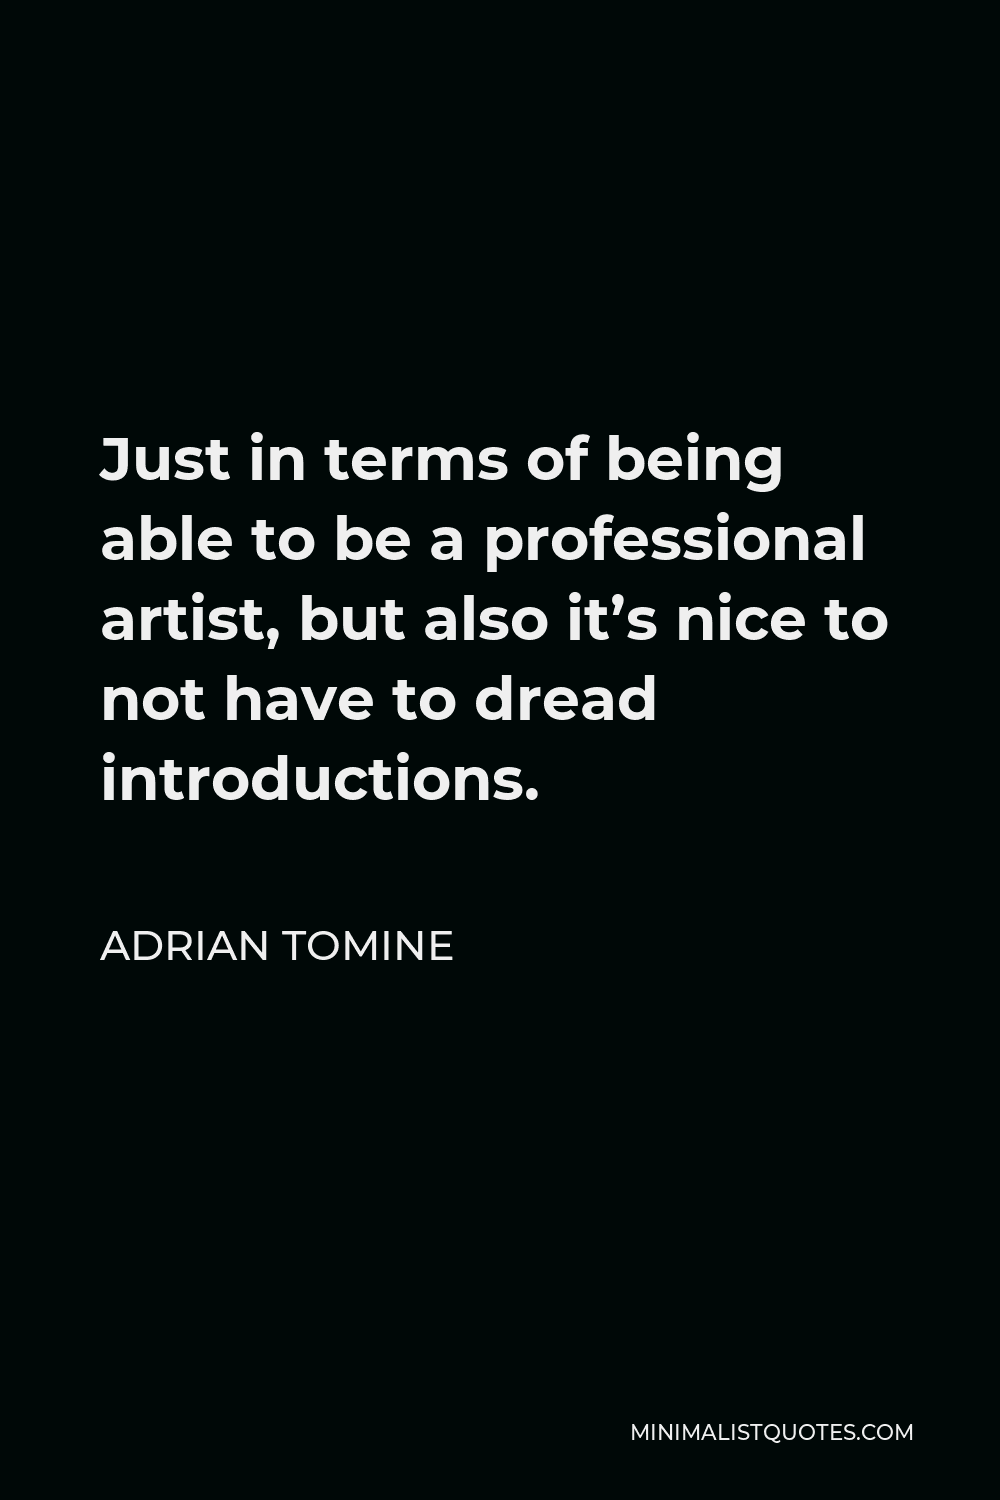 Adrian Tomine Quote - Just in terms of being able to be a professional artist, but also it’s nice to not have to dread introductions.